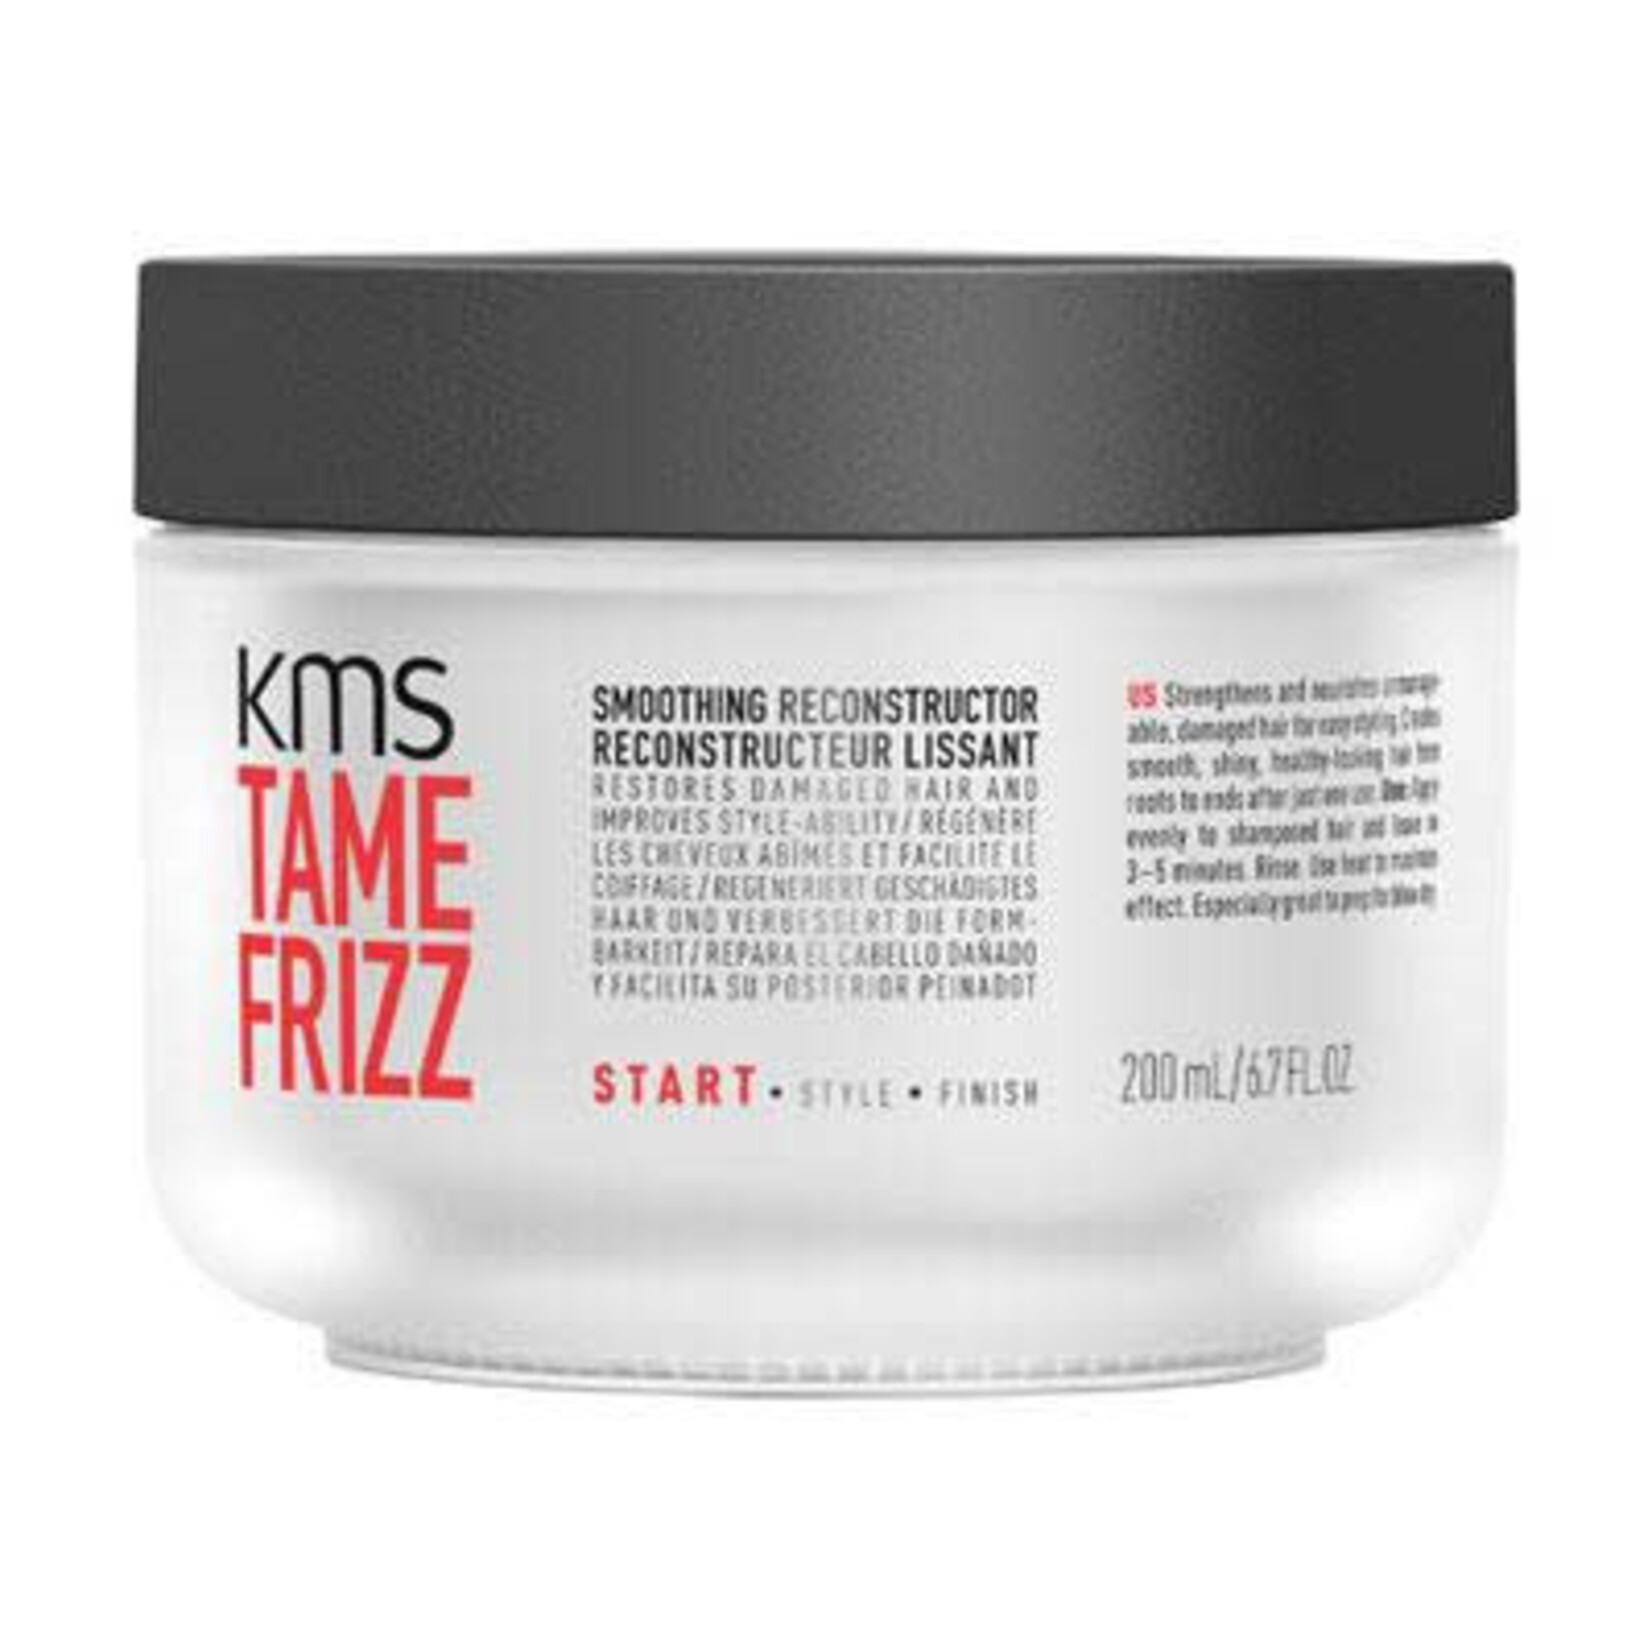 KMS KMS - Tamefrizz - Smoothing Reconstructor 200ml